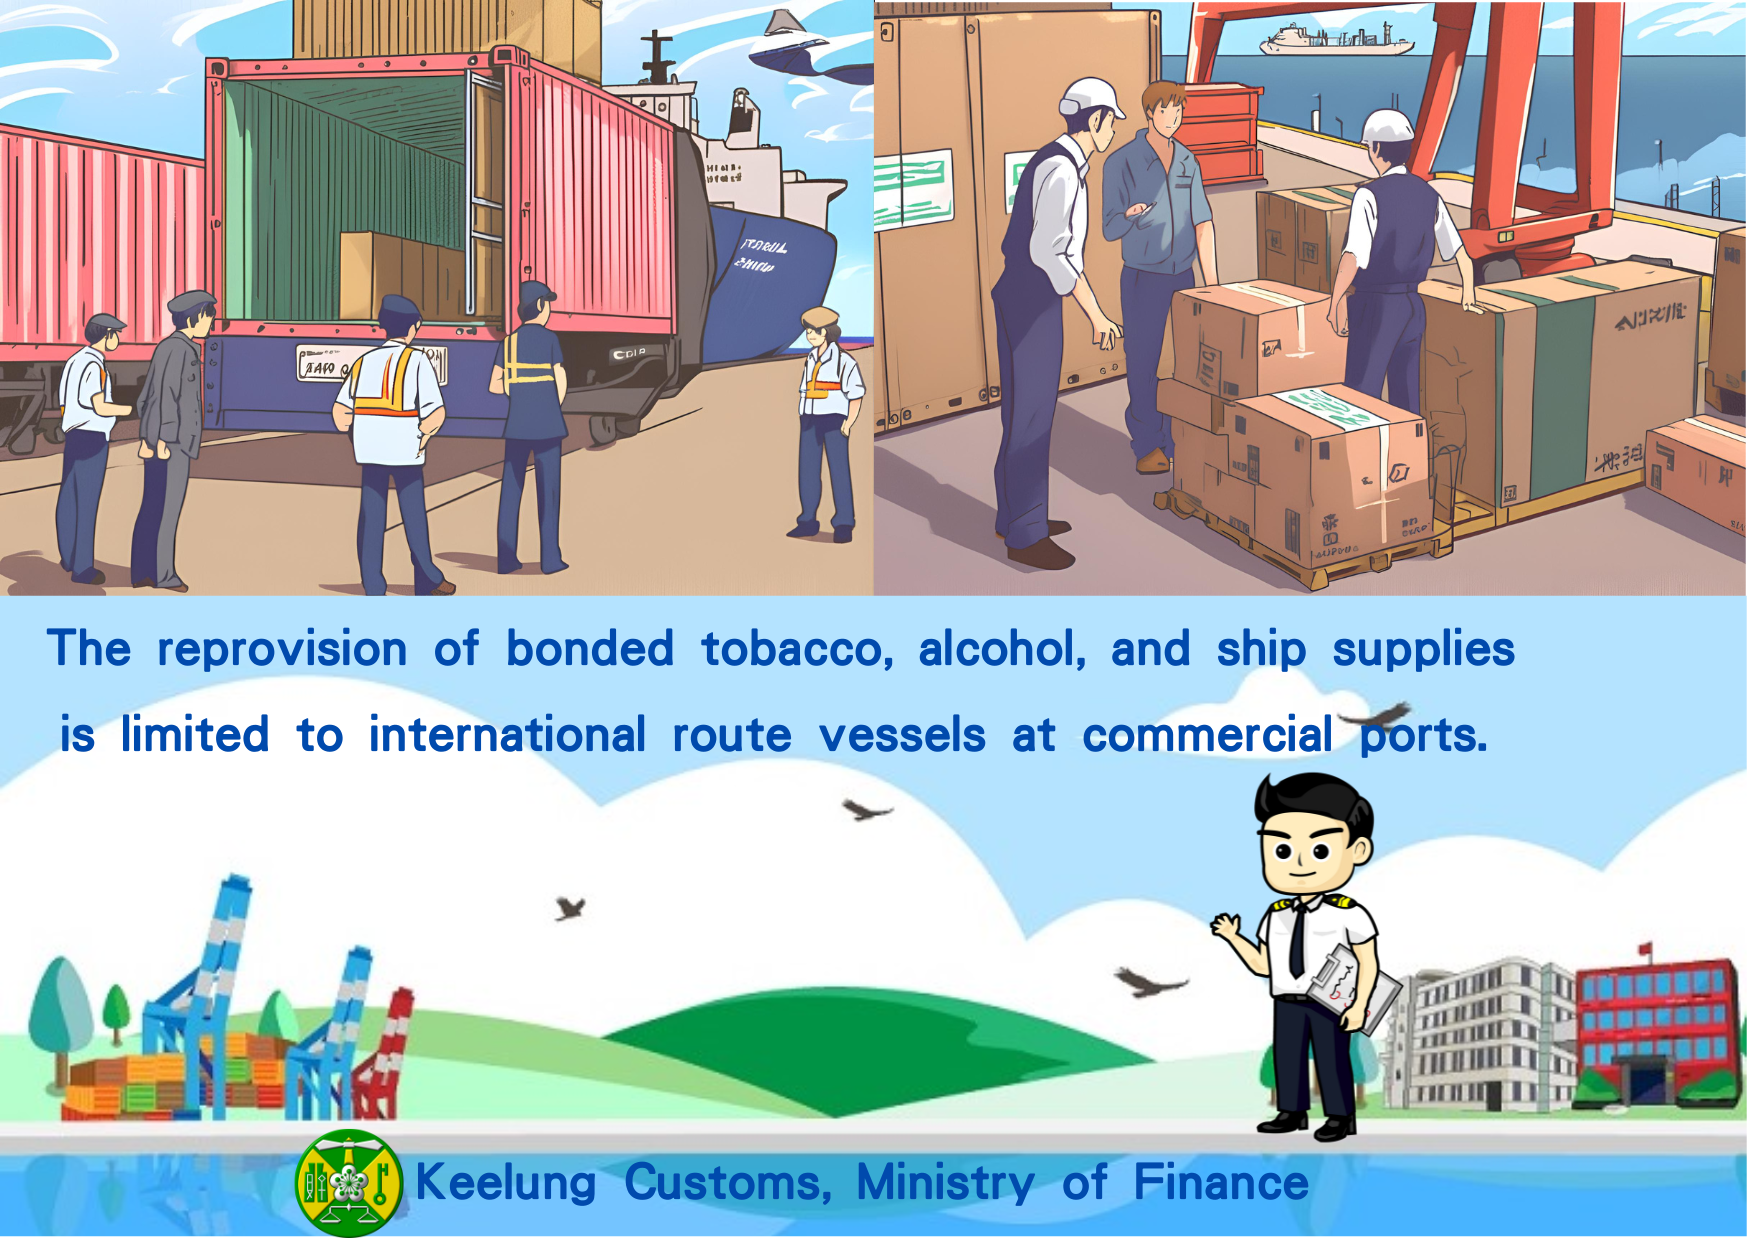 Applications for Bonded Tobacco, Alcohol Supplies Limited to International Route Vessels at Commercial Ports